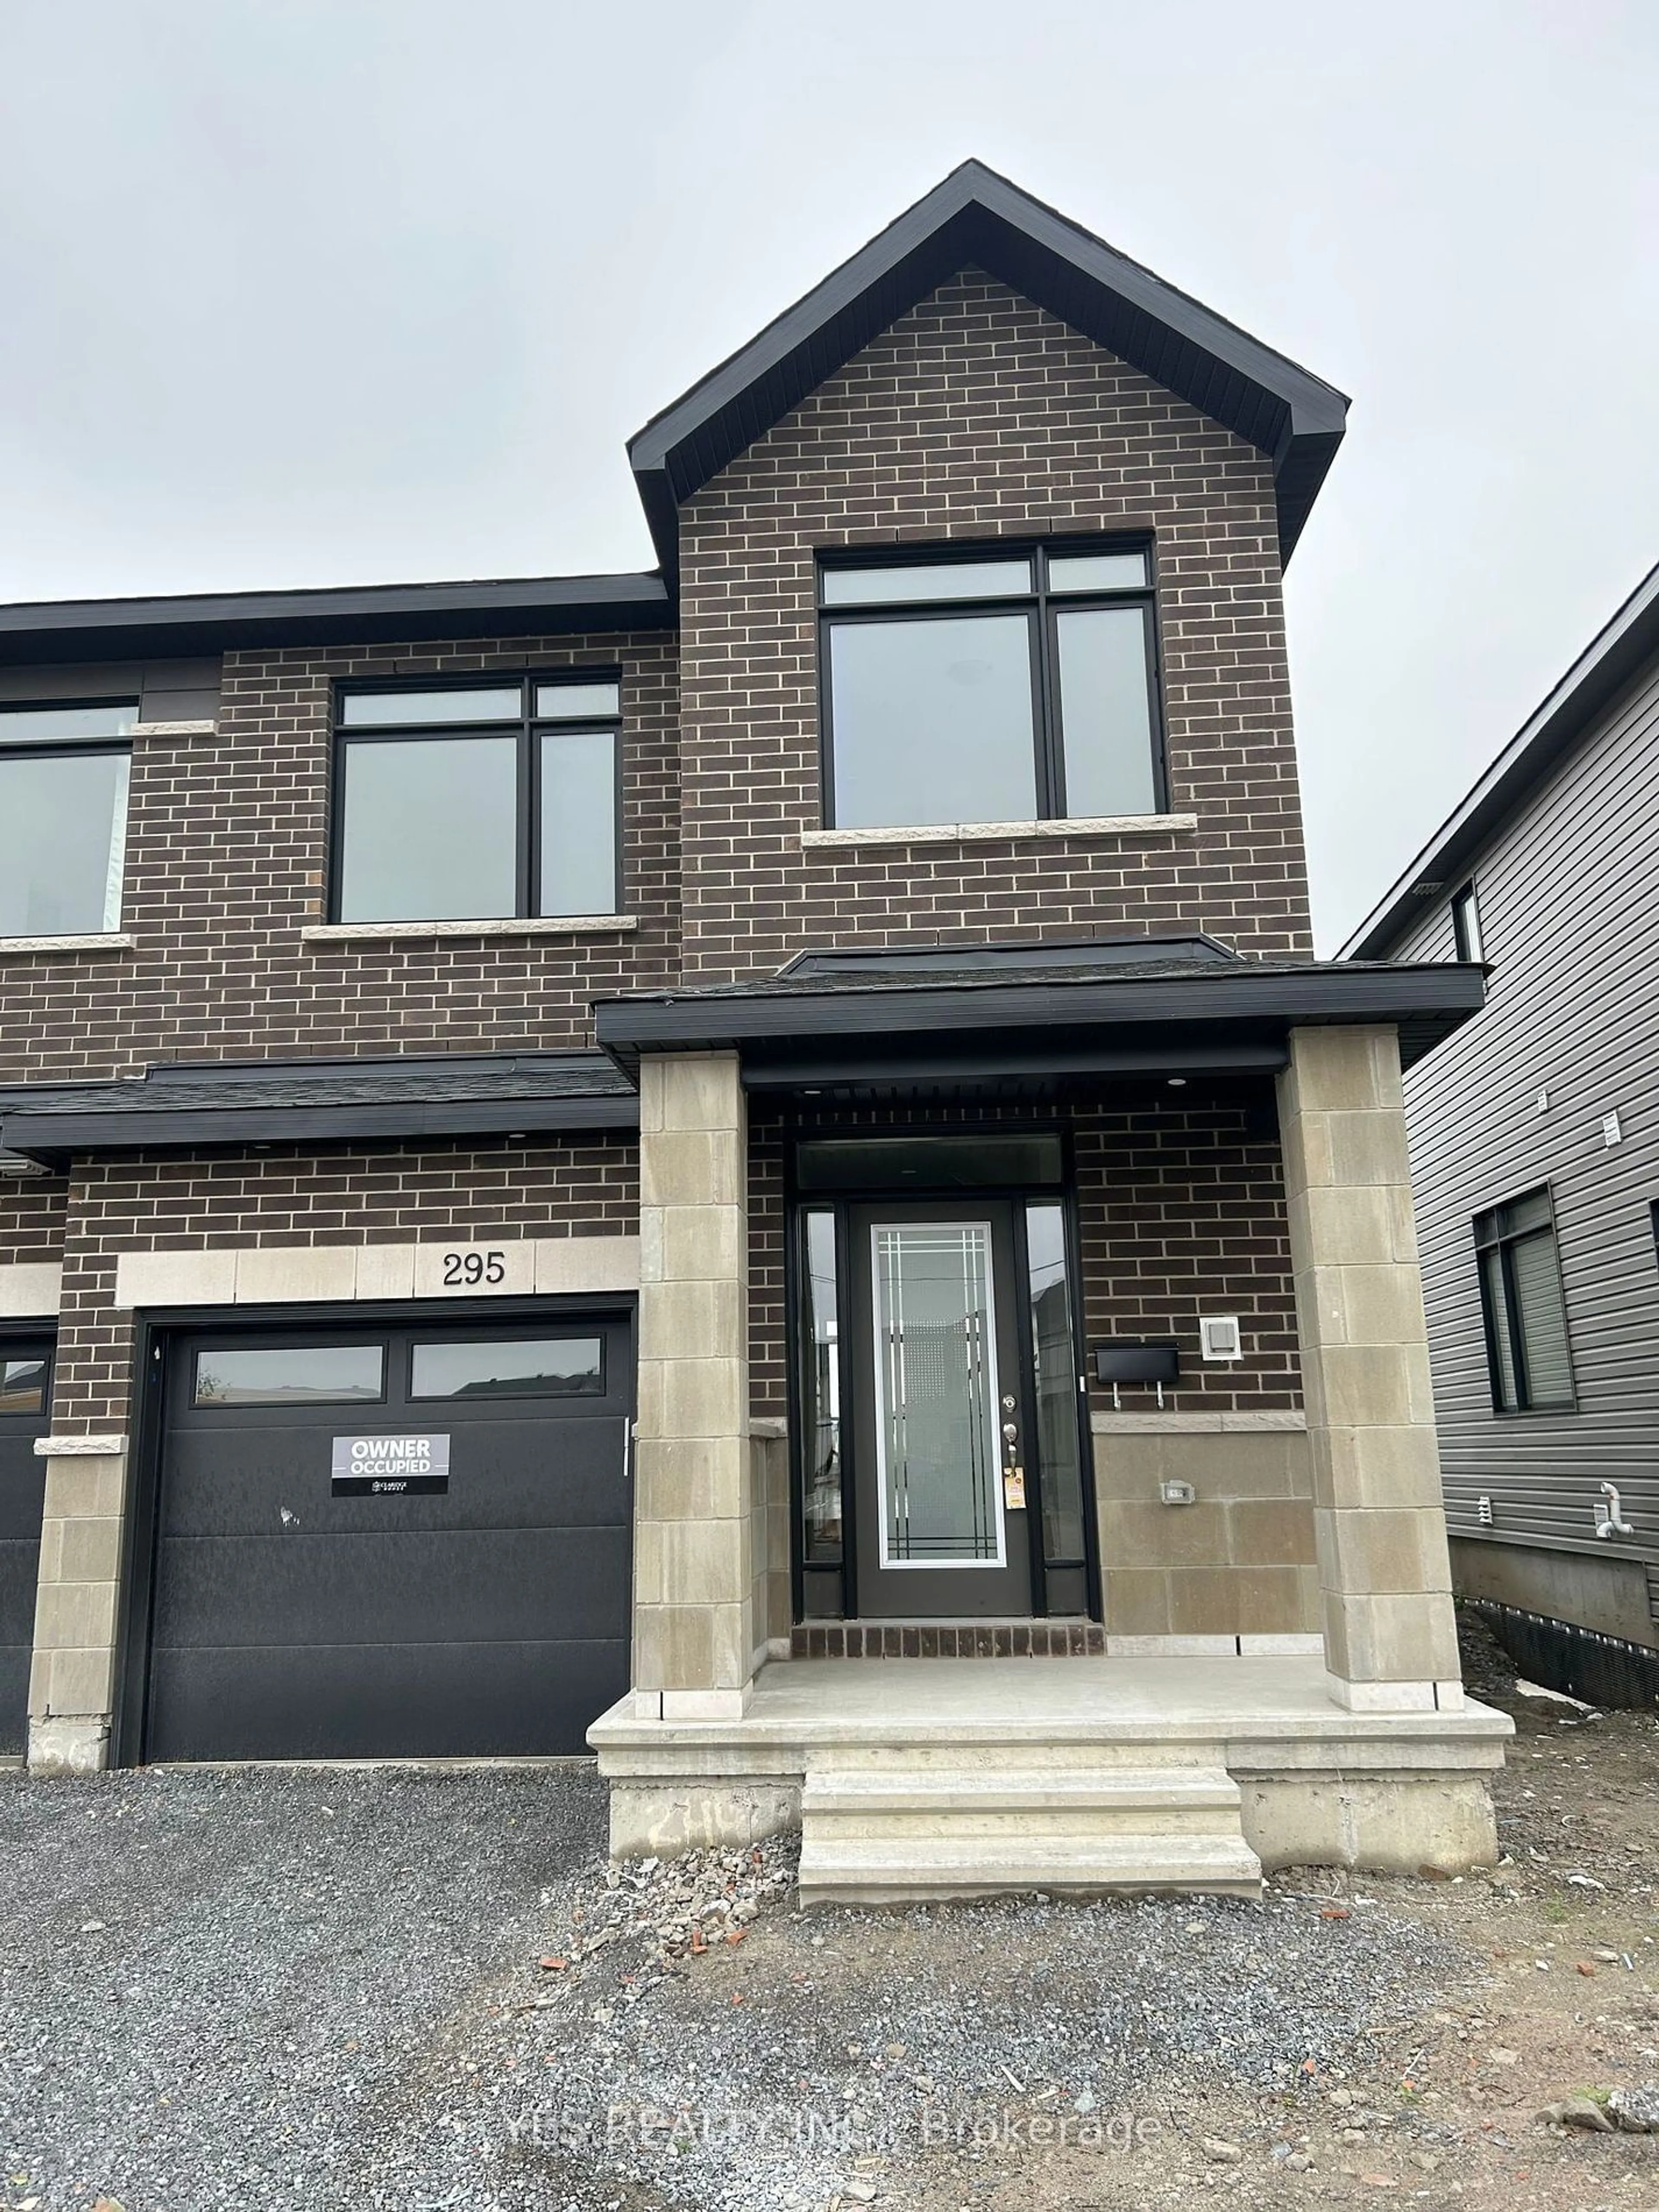 Home with brick exterior material for 295 Monticello Ave, Ottawa Ontario K2S 2S5